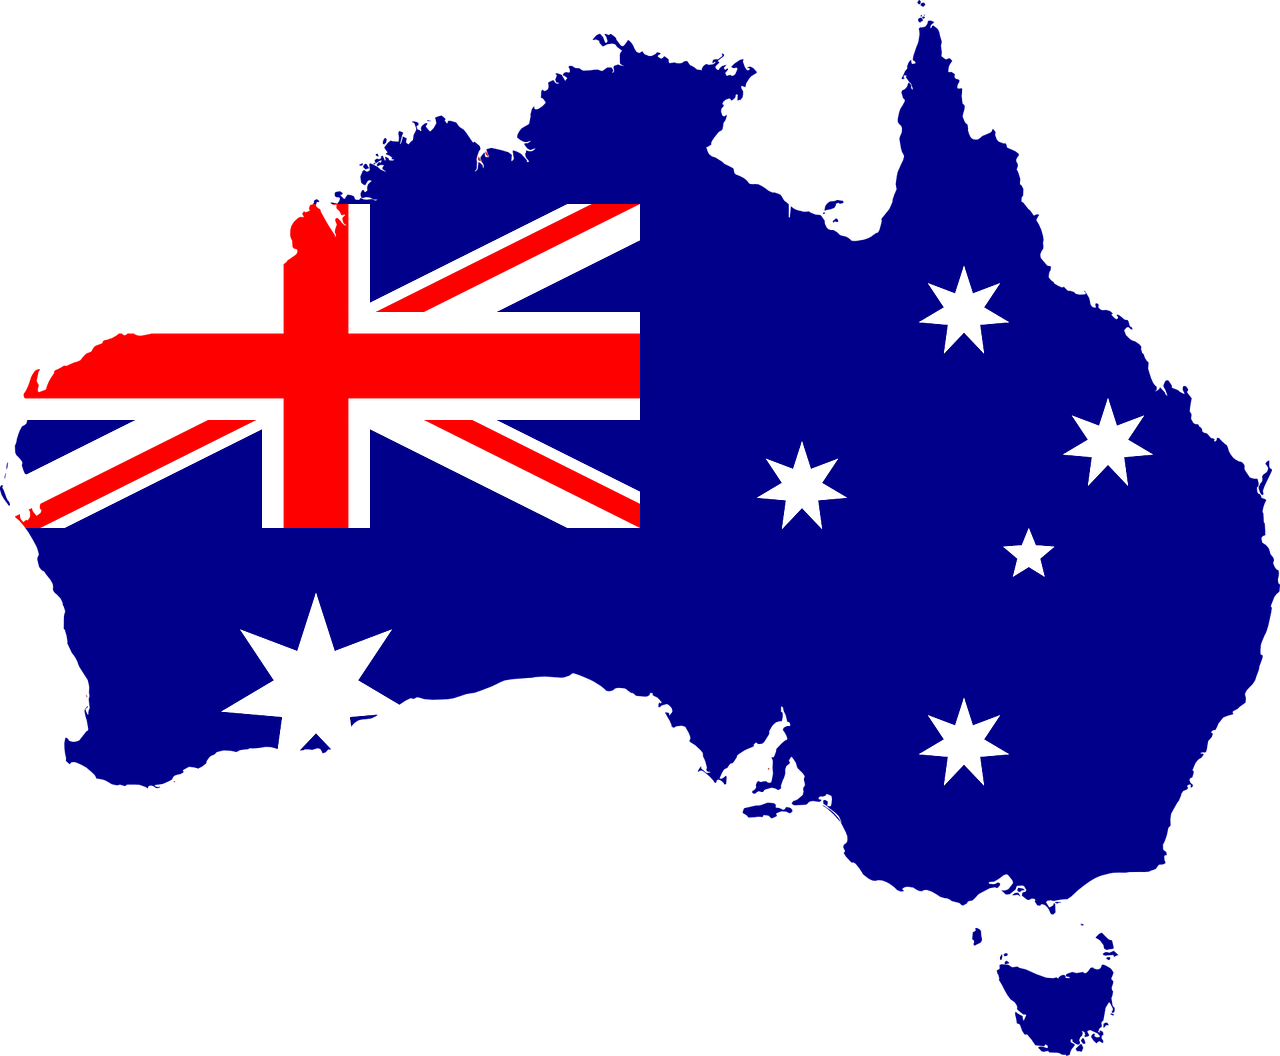 Australian eSafety Regulation is a threat to encryption and privacy.